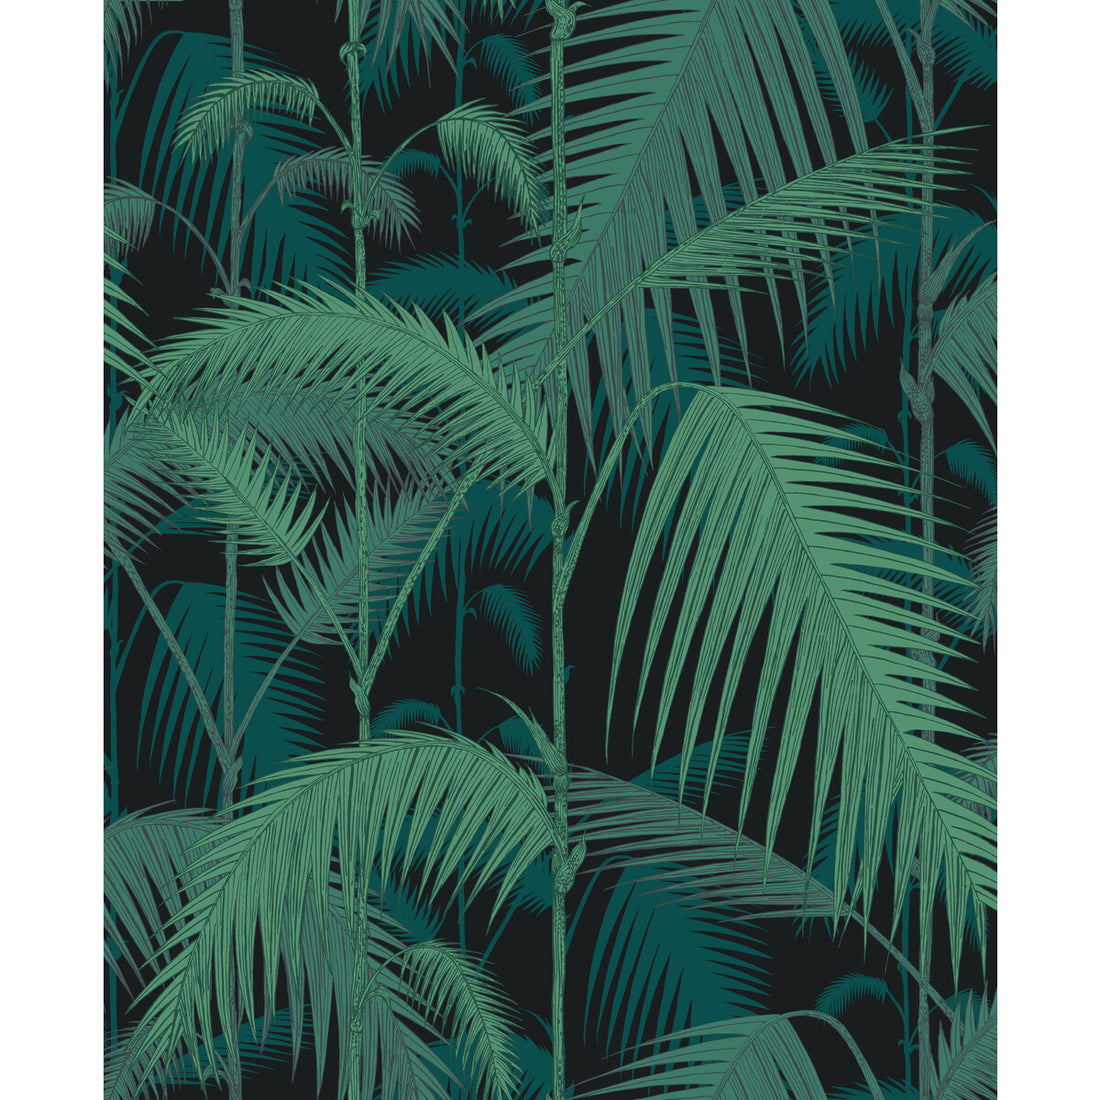 Palm Jungle fabric in vir/pet on char color - pattern F111/2004L.CS.0 - by Cole &amp; Son in the Cole &amp; Son Contemporary Fabrics collection